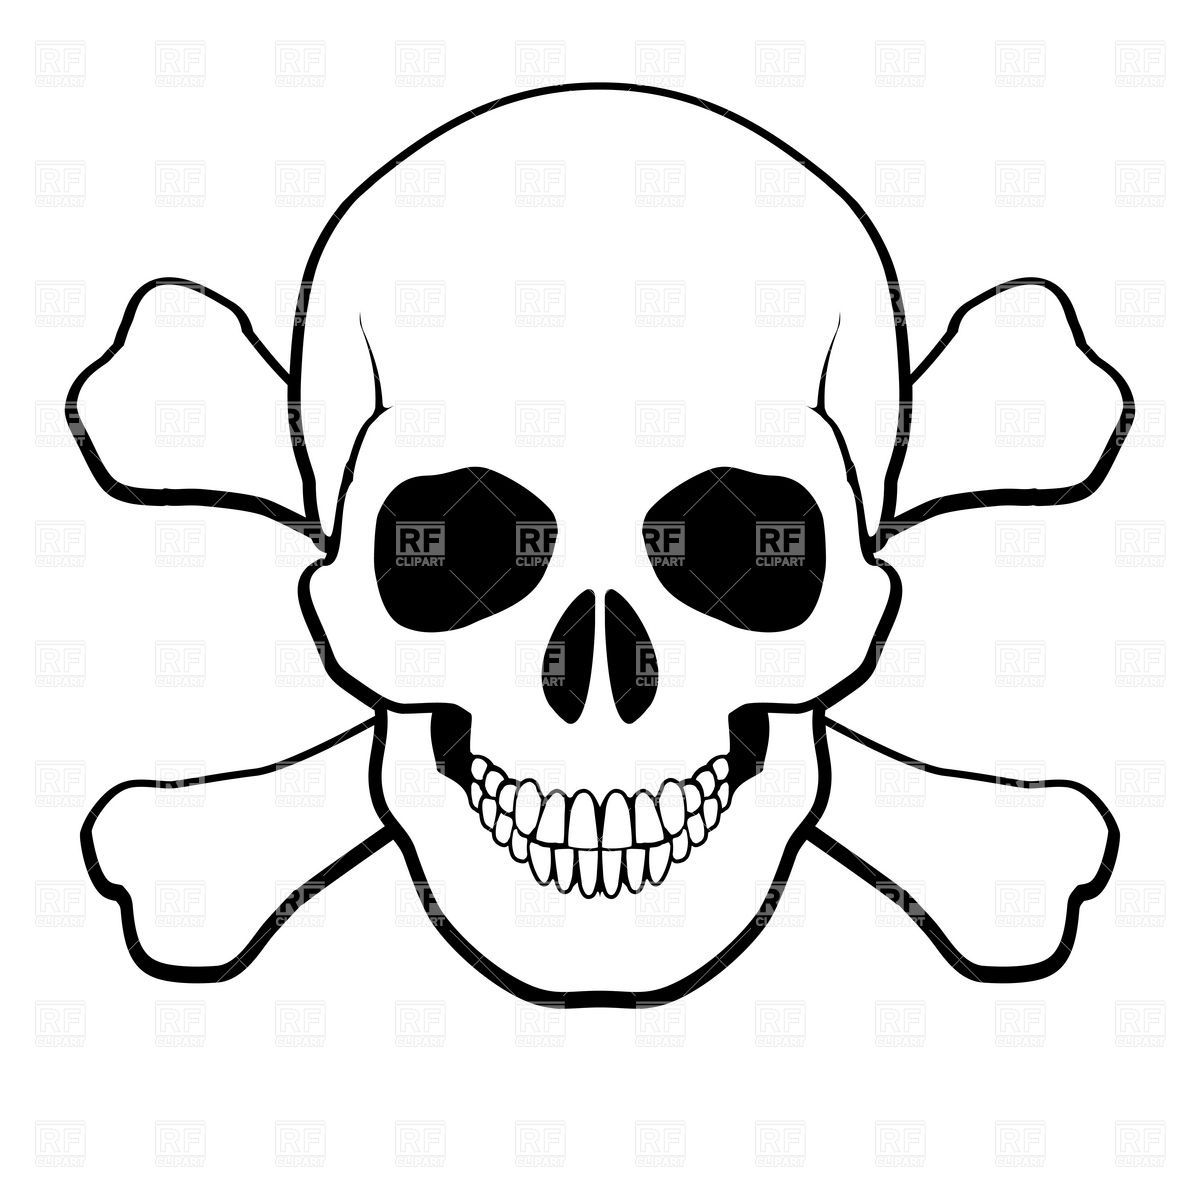 Skull And Crossbones Download Royalty Free Vector Clipart  Eps